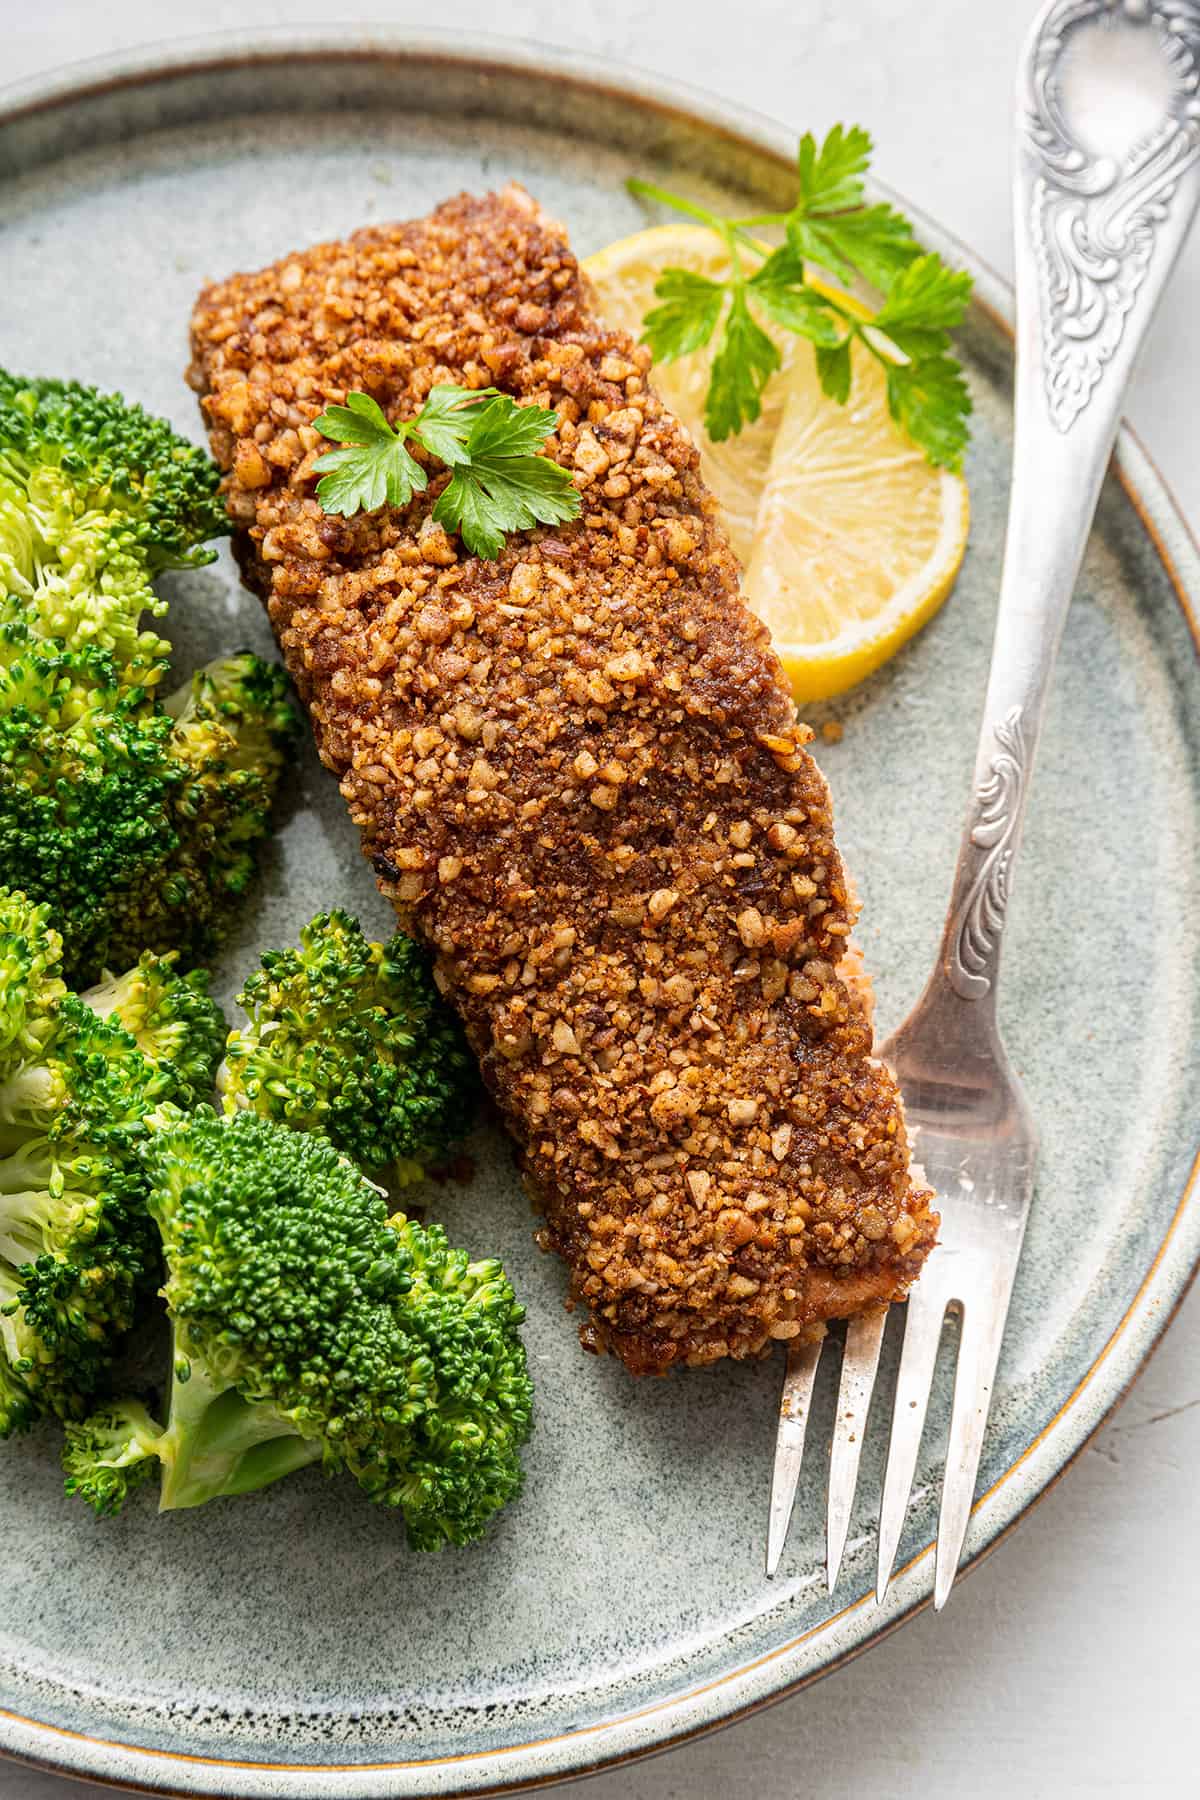 A serving of pecan crusted salmon on a plate with broccoli and a lemon wedge